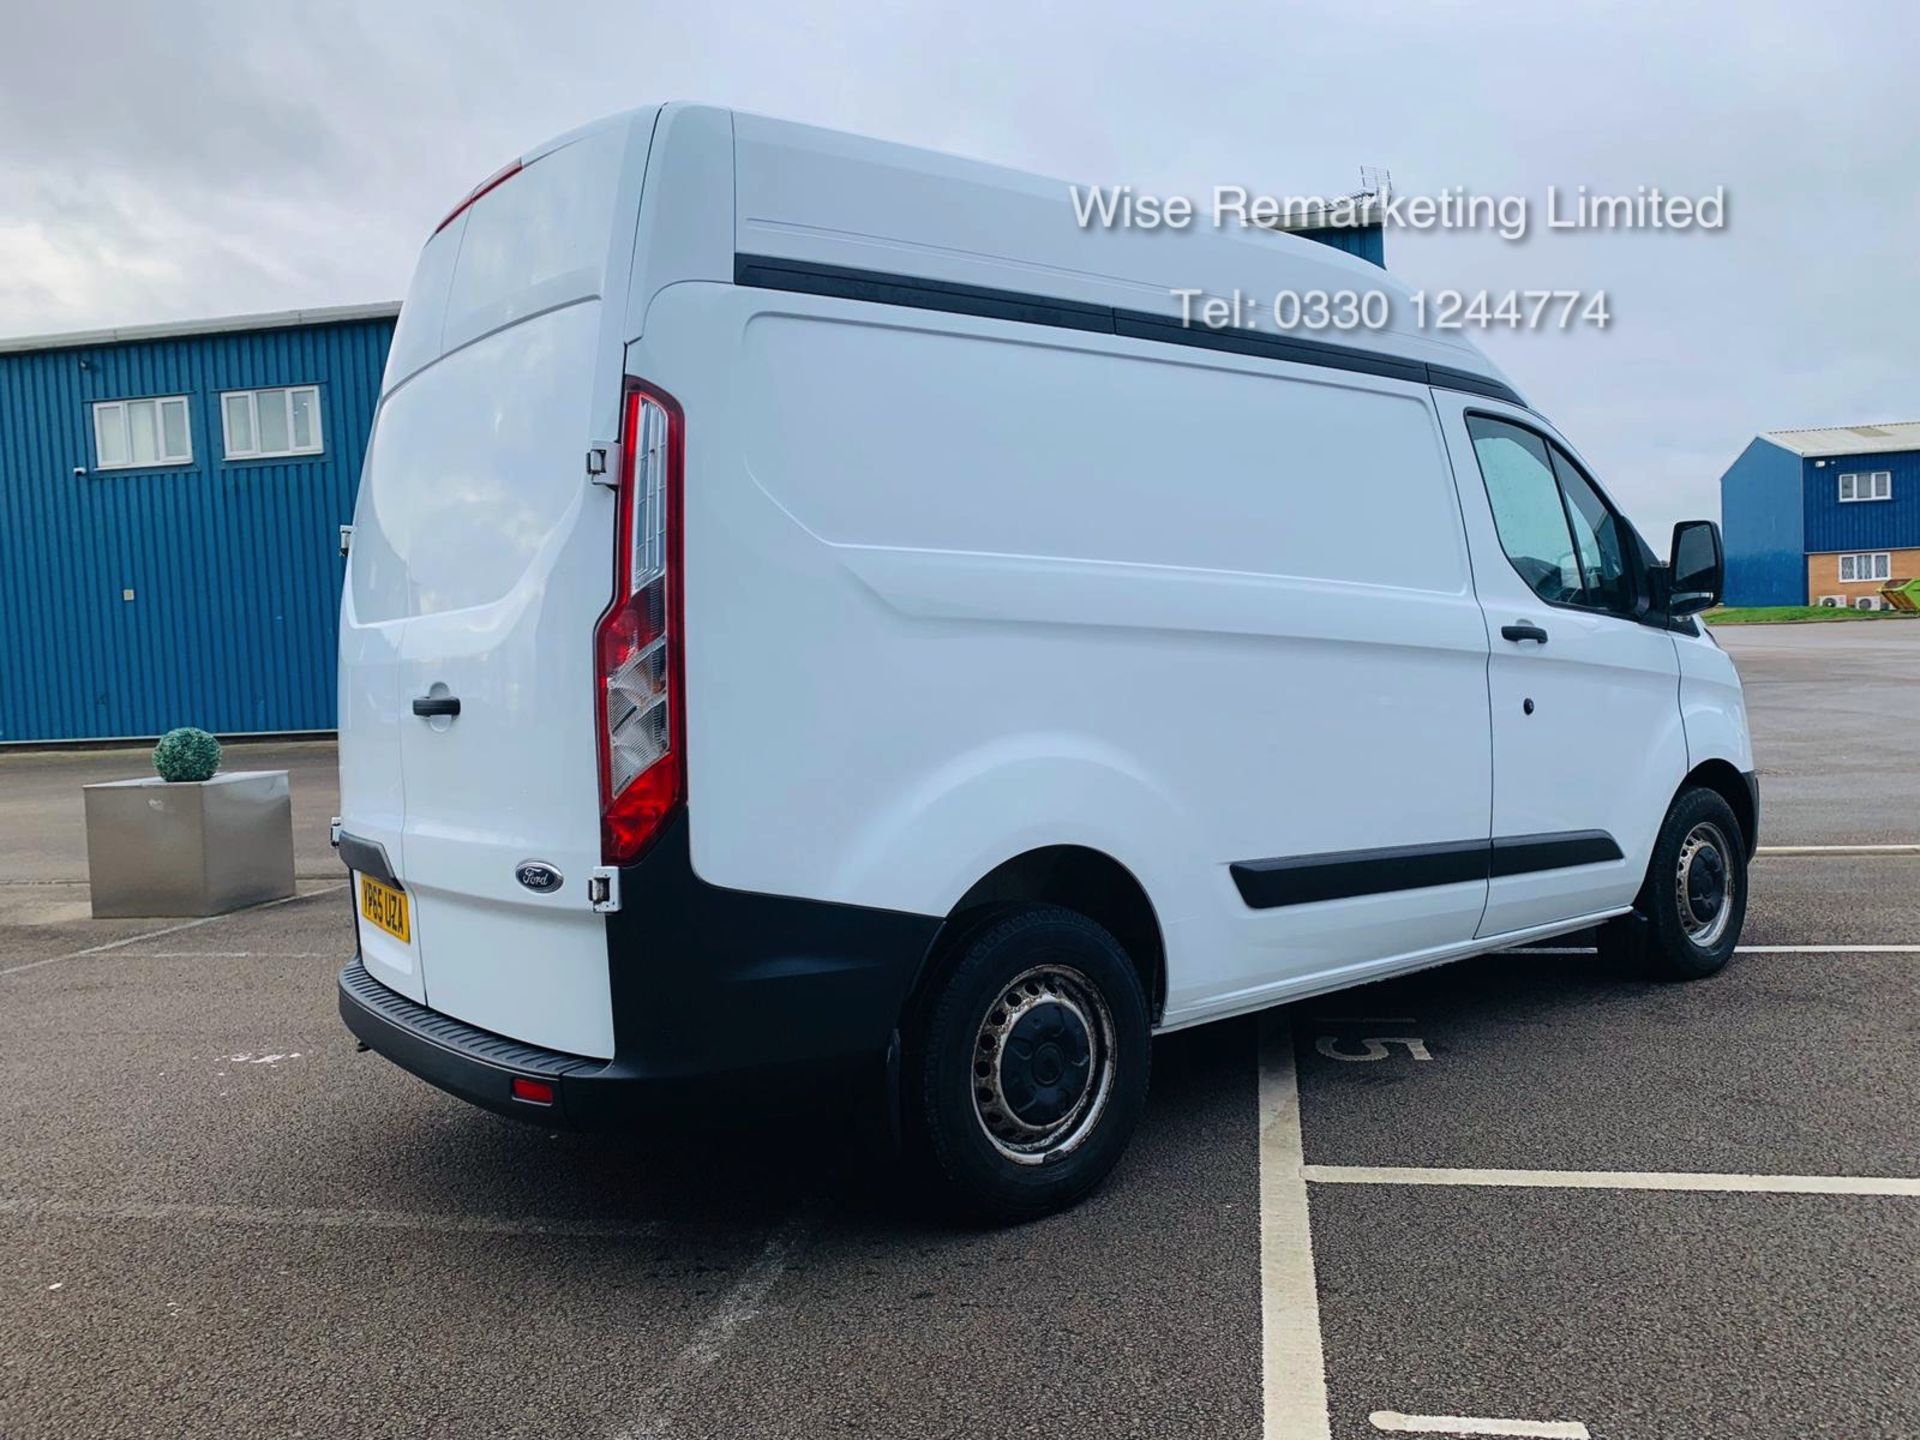 (RESERVE MET) Ford Transit Custom 2.2 TDCI 290 **HIGH ROOF** - 2016 Model - AIR CON- 1 OWNER- FSH- - Image 5 of 24